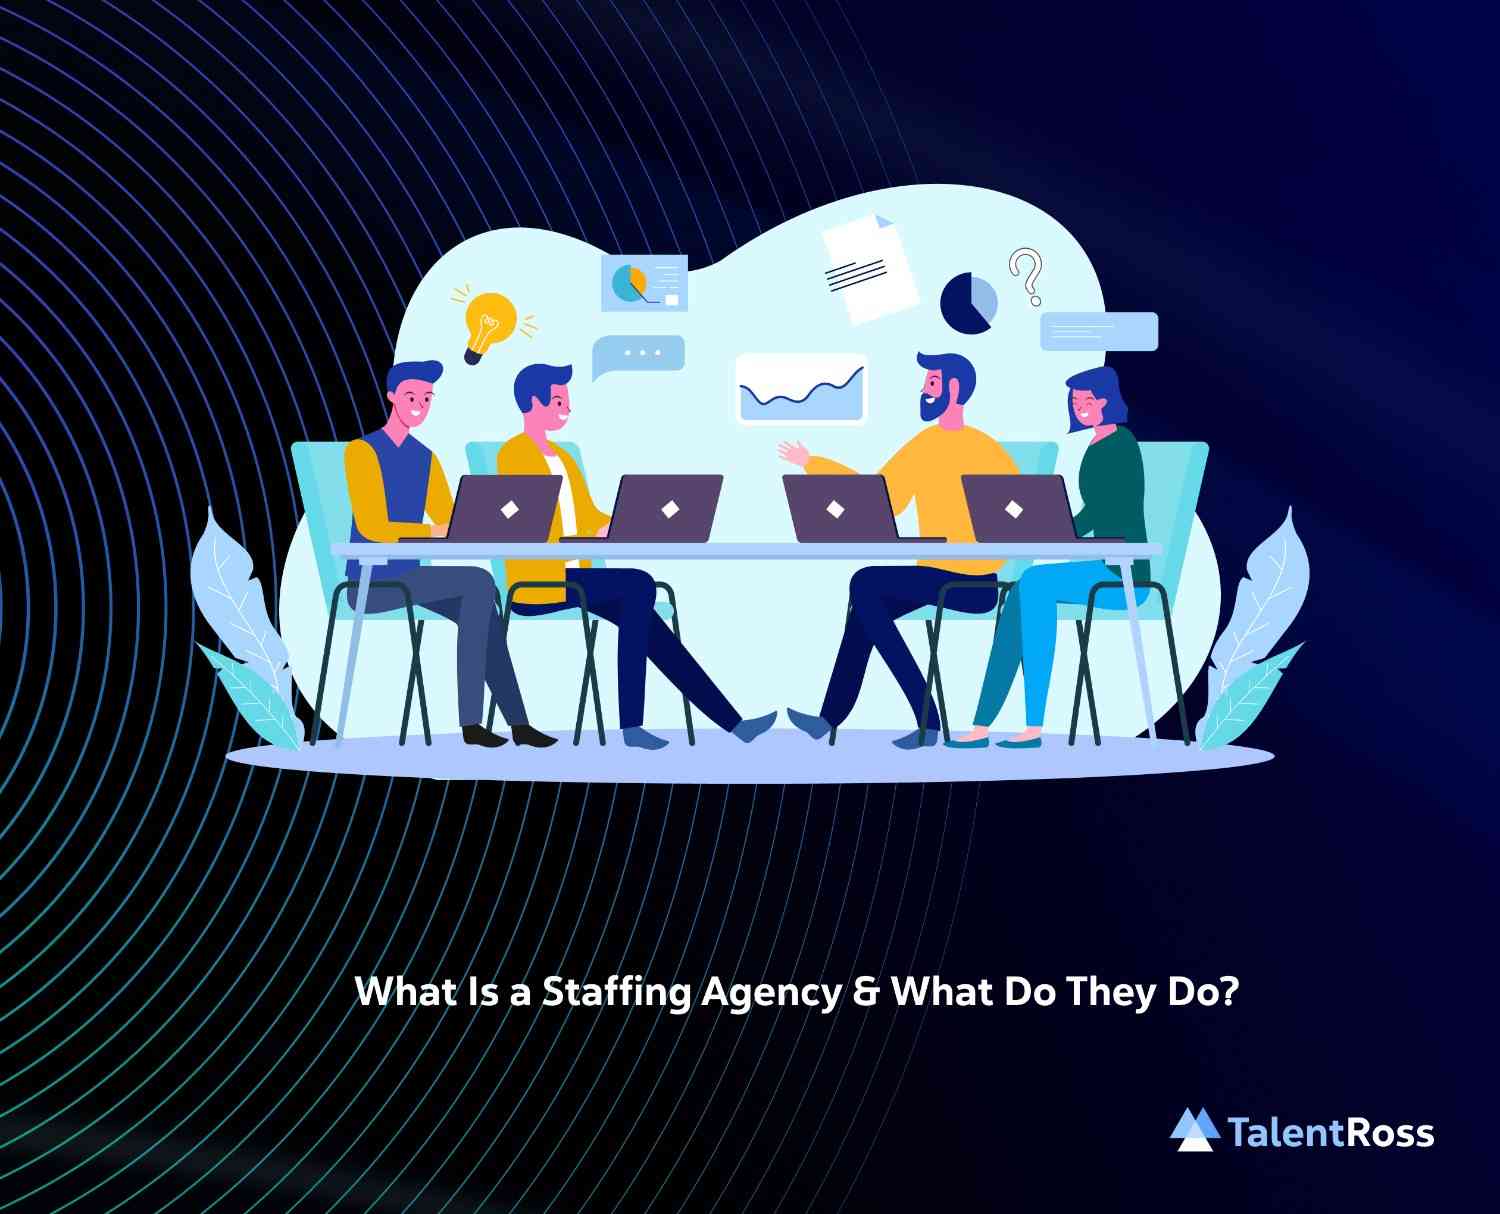 What Is a Staffing Agency & What Do They Do?